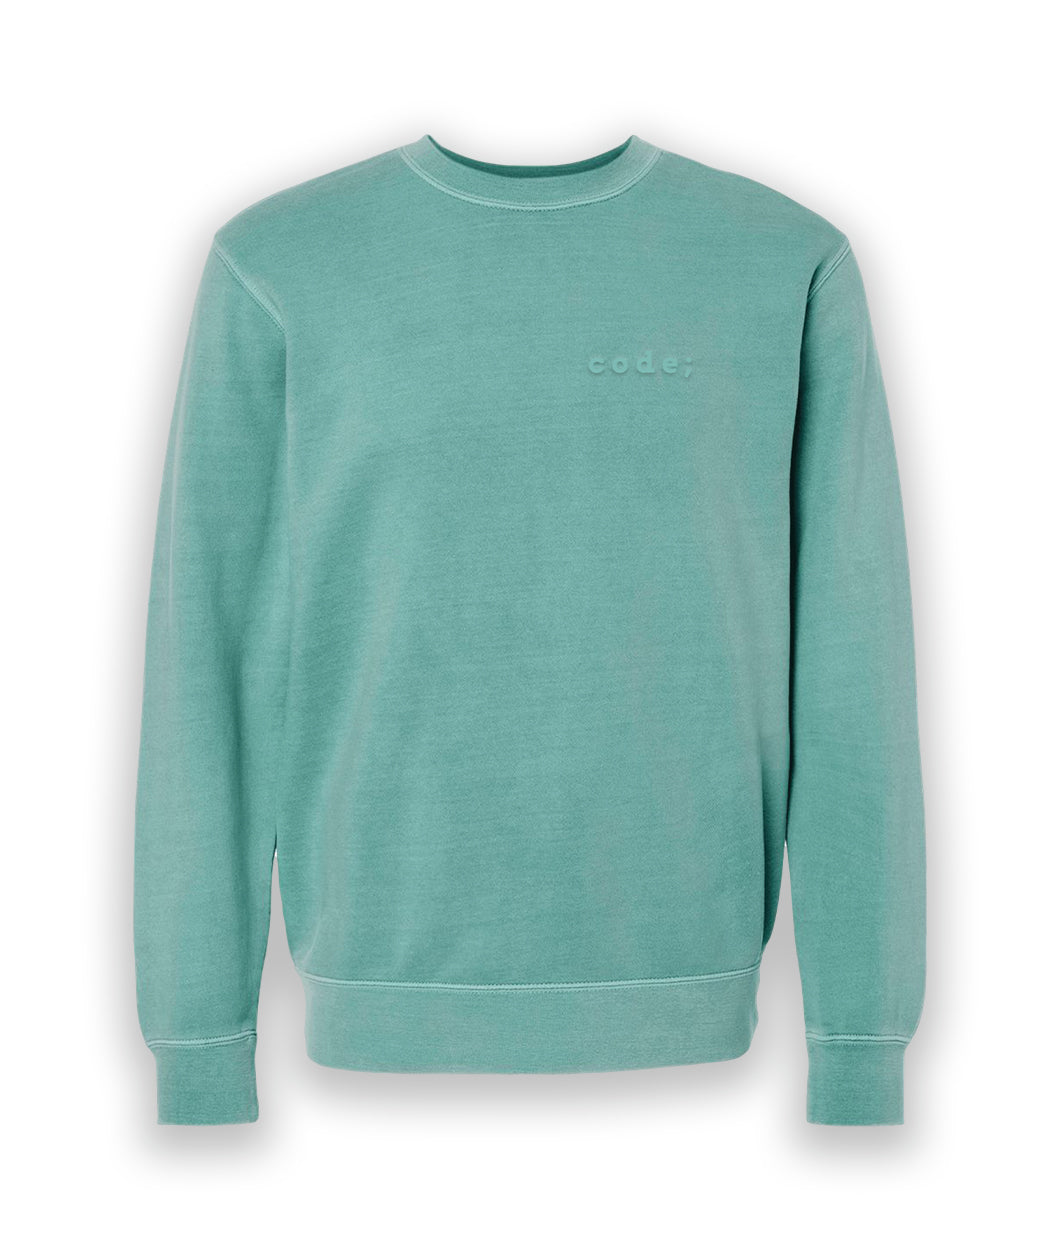 A mint green crewneck sweater with “code;” embroidered in the top right of the sweater in mint green - from Hello Mayuko